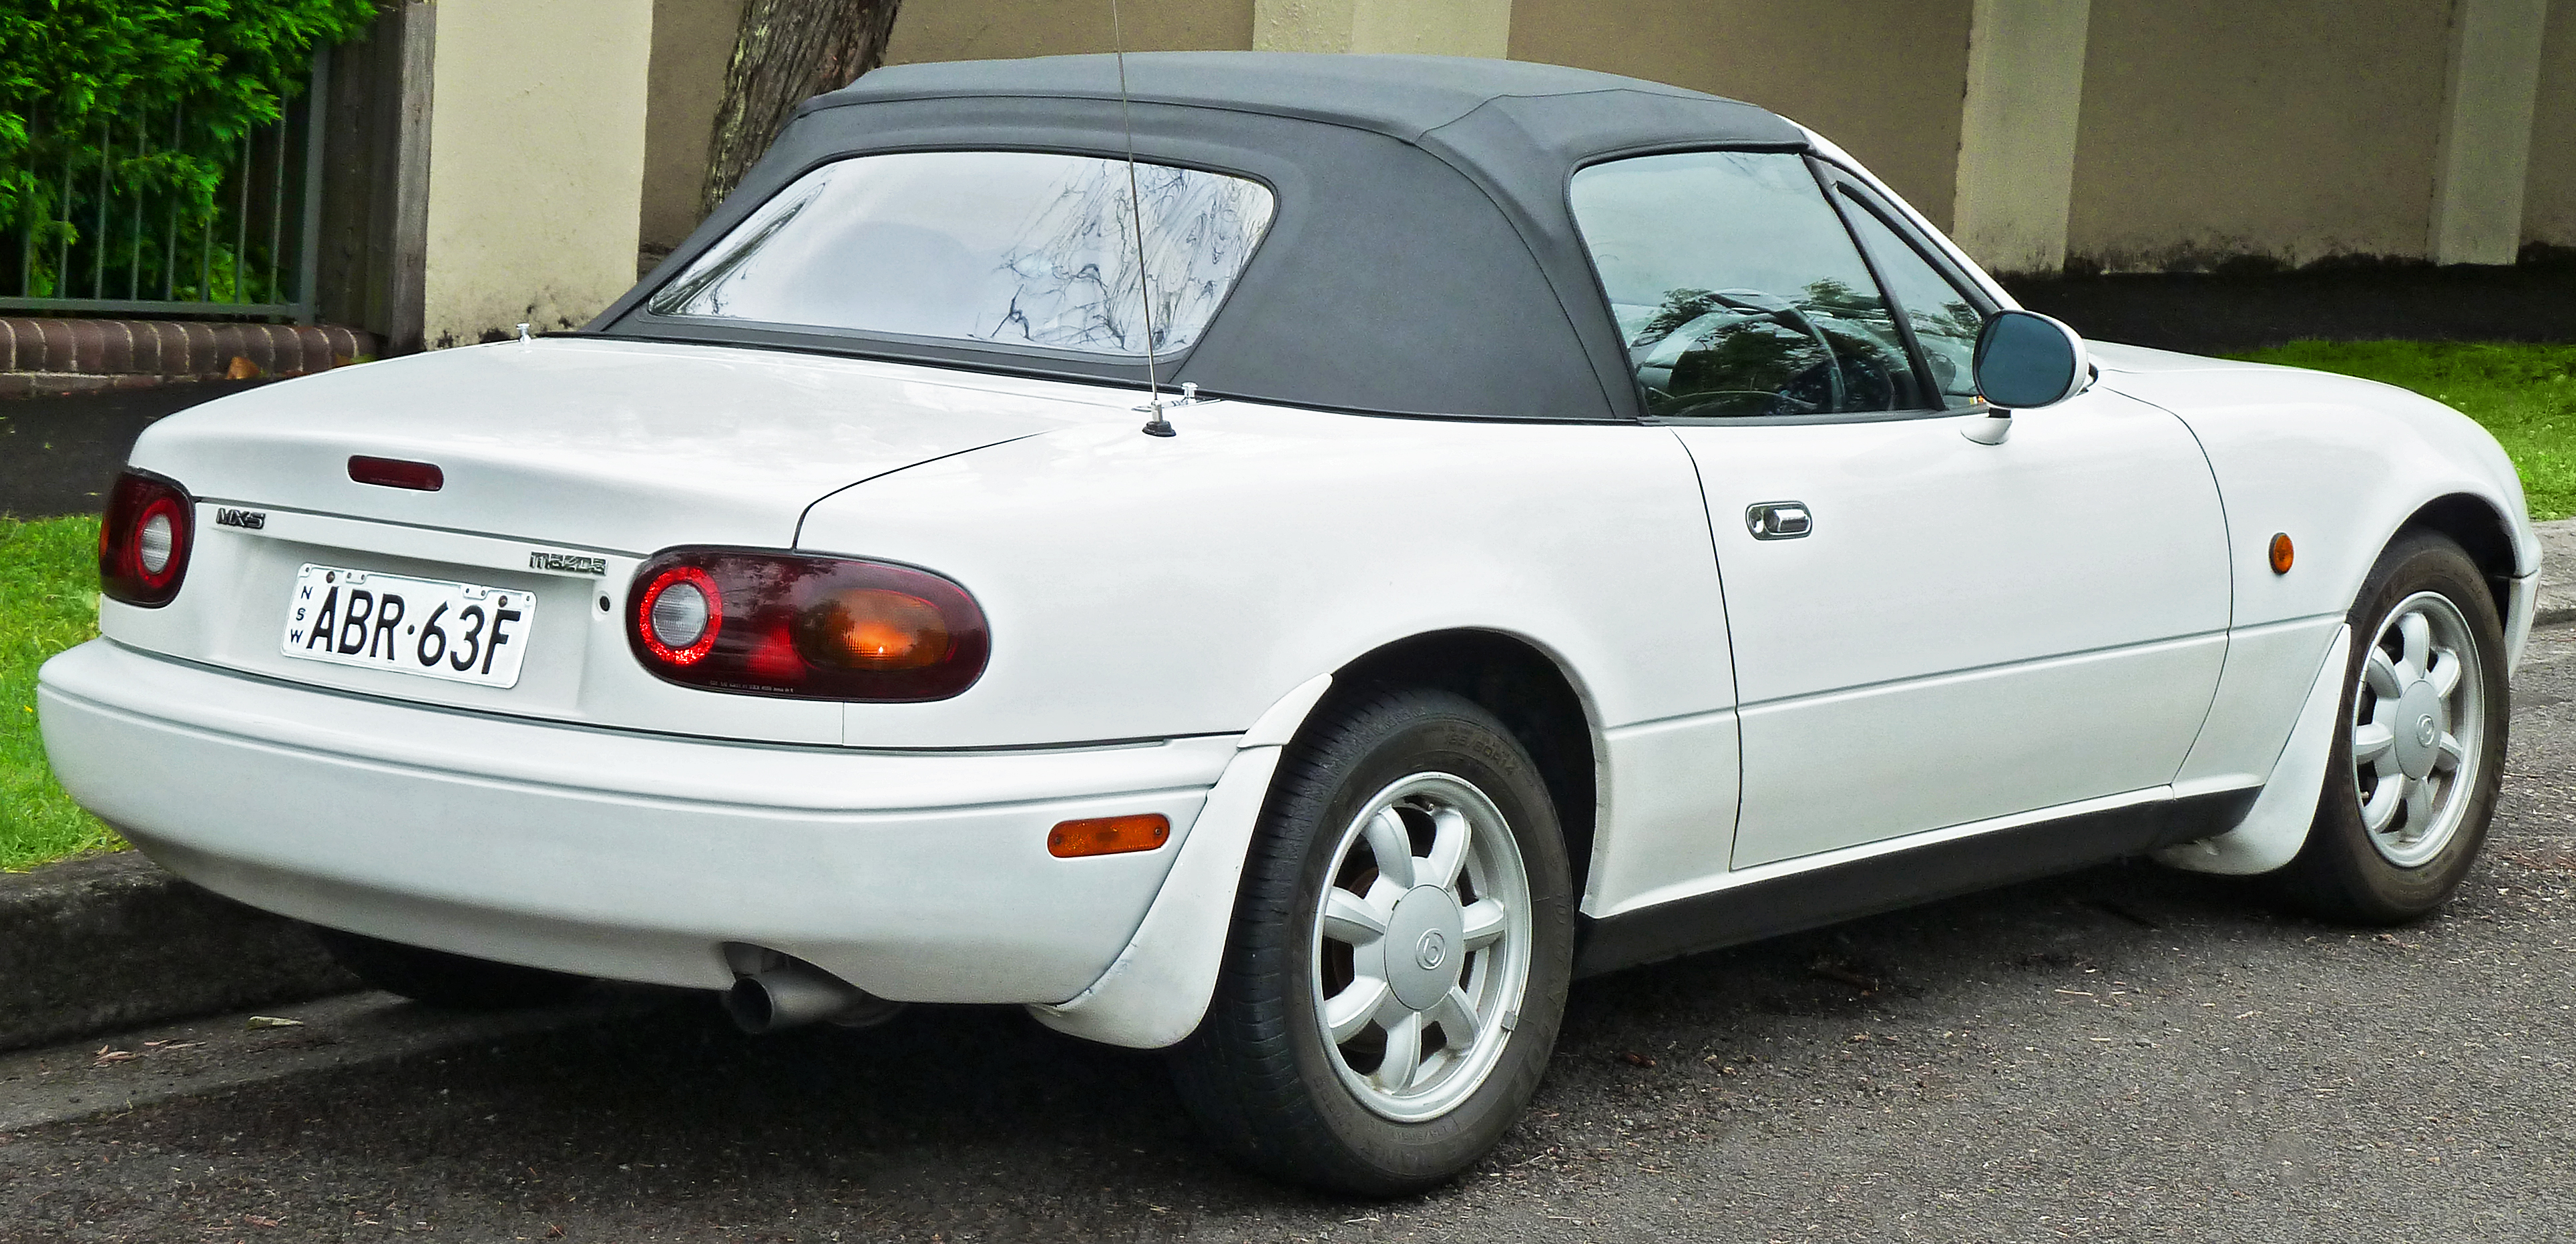 Mazda MX-5 1989: Review, Amazing Pictures and Images - Look at the car